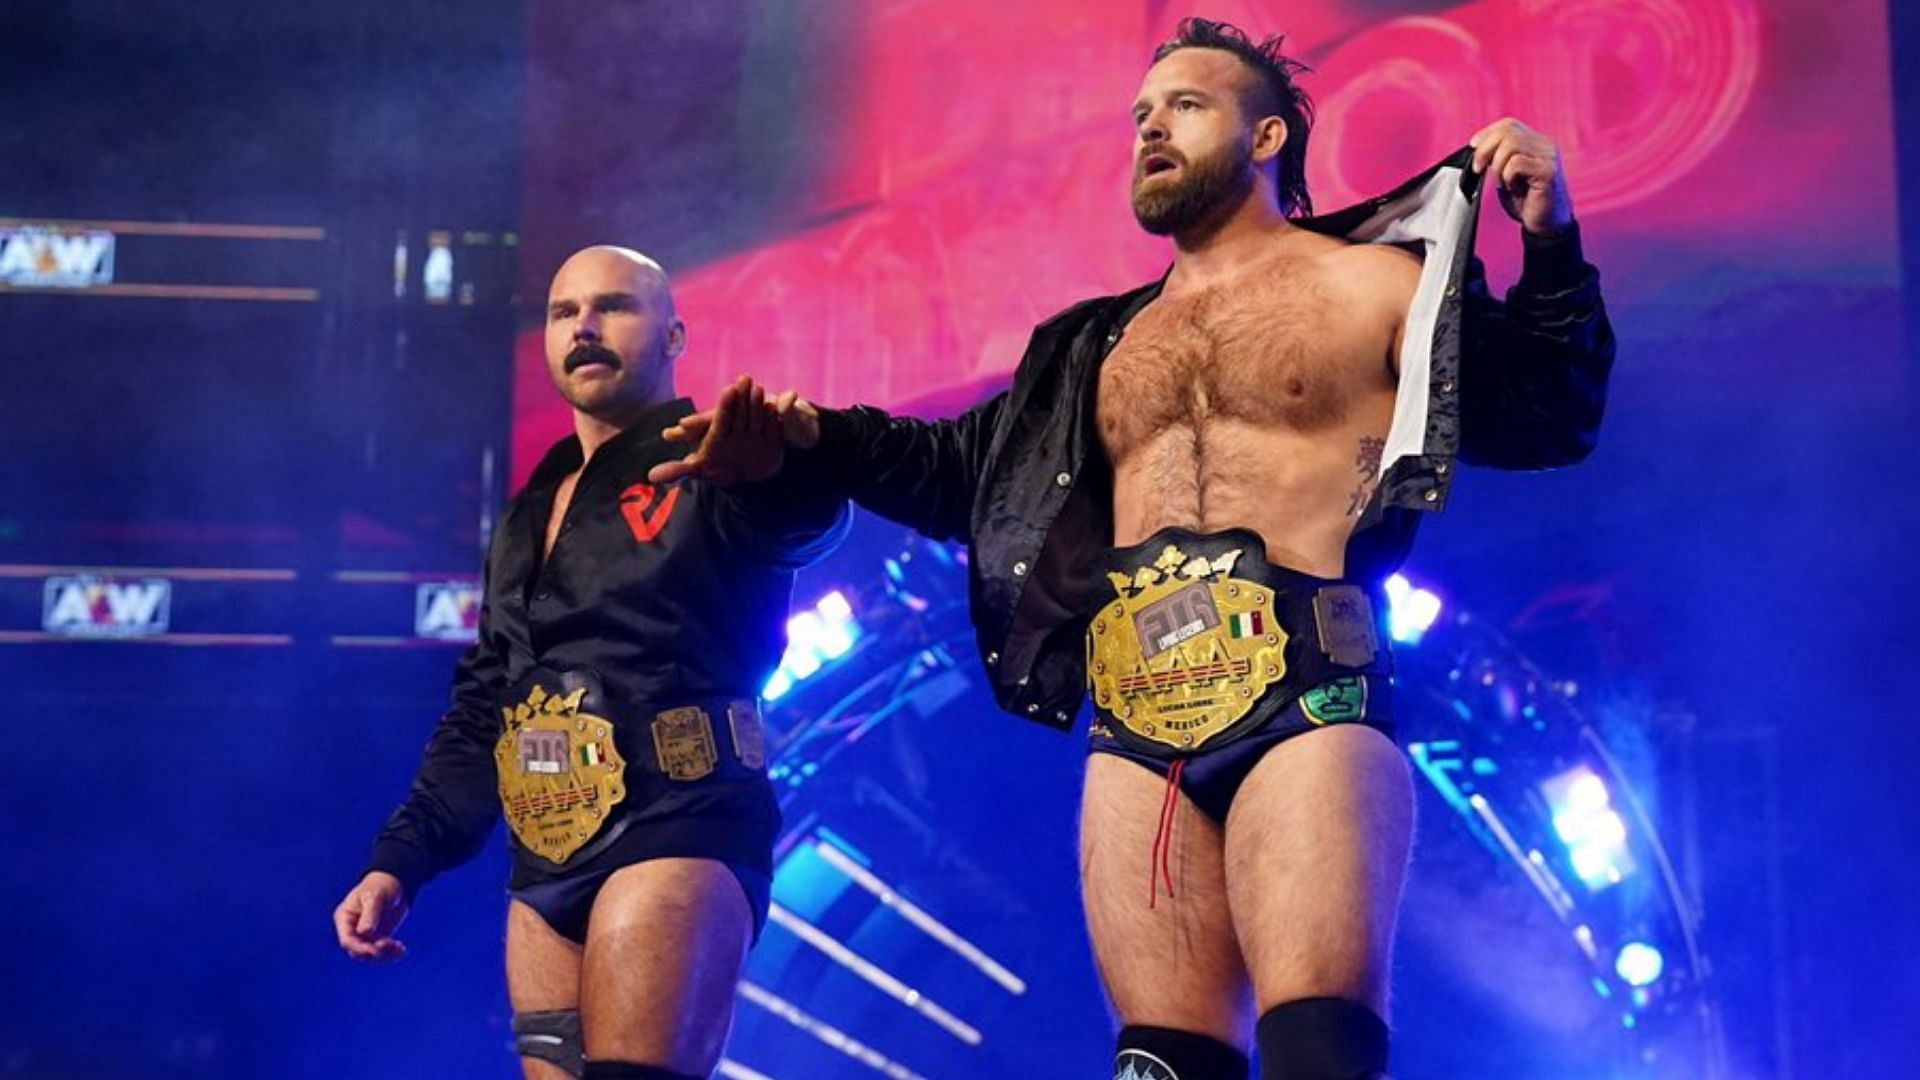 FTR as the AAA Tag Team Champions in 2022